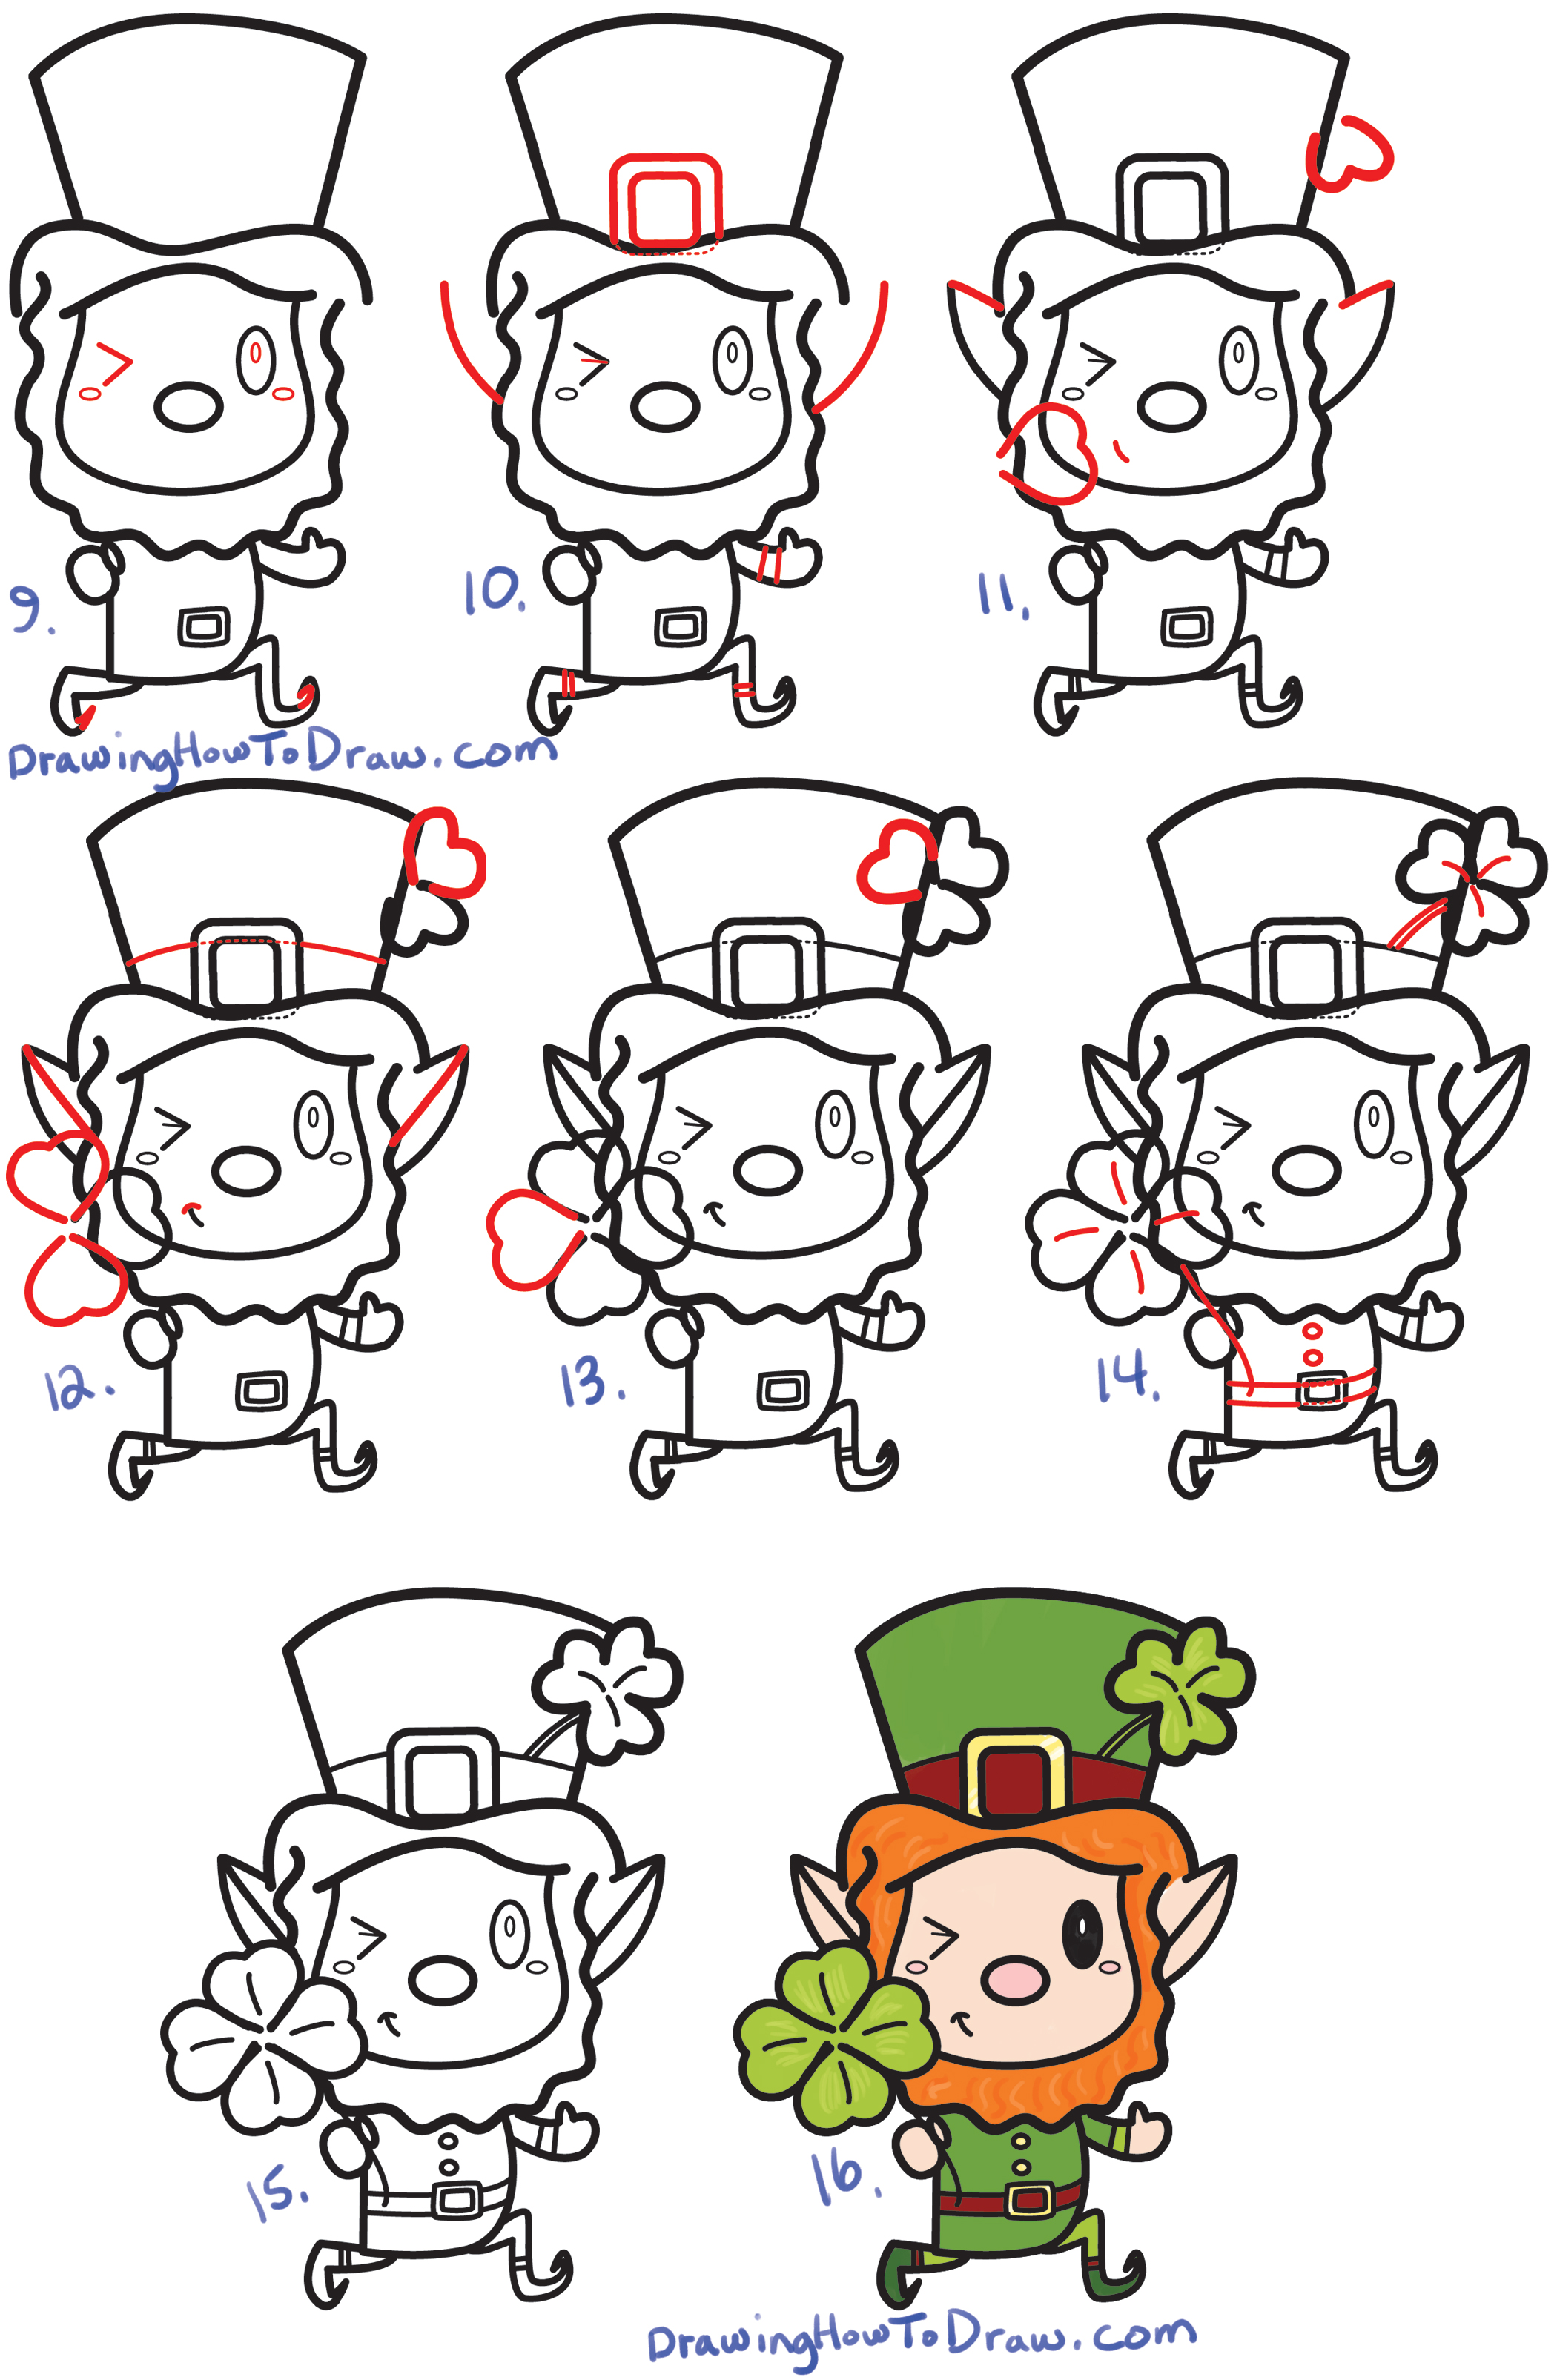 Learn How to Draw a Cute Kawaii Leprechaun for Saint Patrick's Day Simple Steps Drawing Lesson for Kids